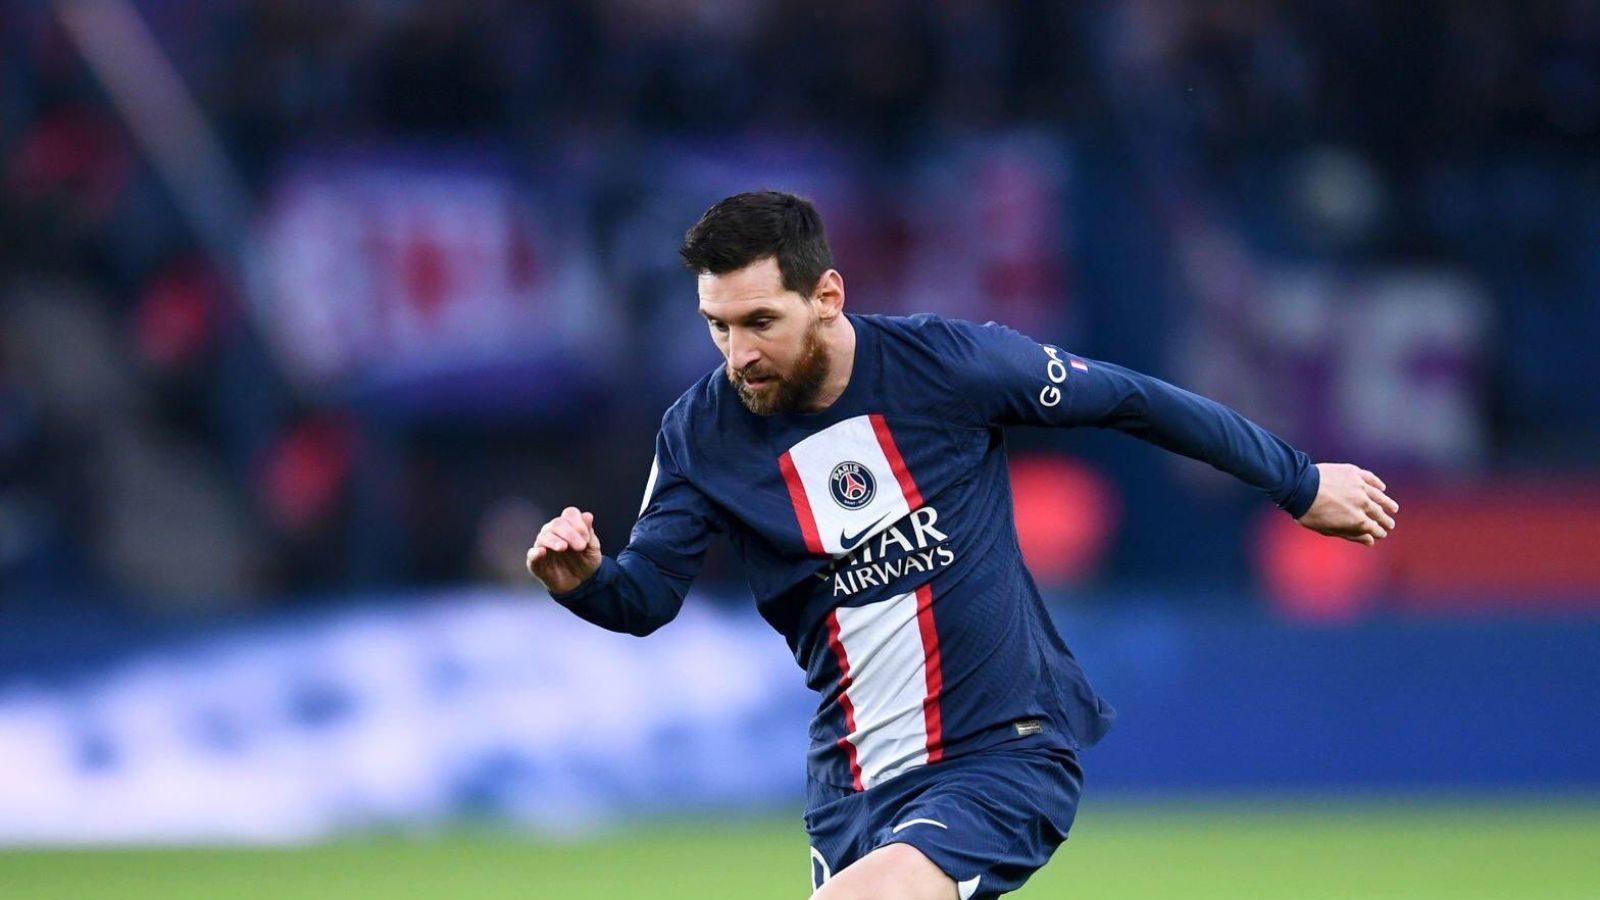 Ligue 1: Lionel Messi On Target as PSG Edge Past Toulouse 2-1